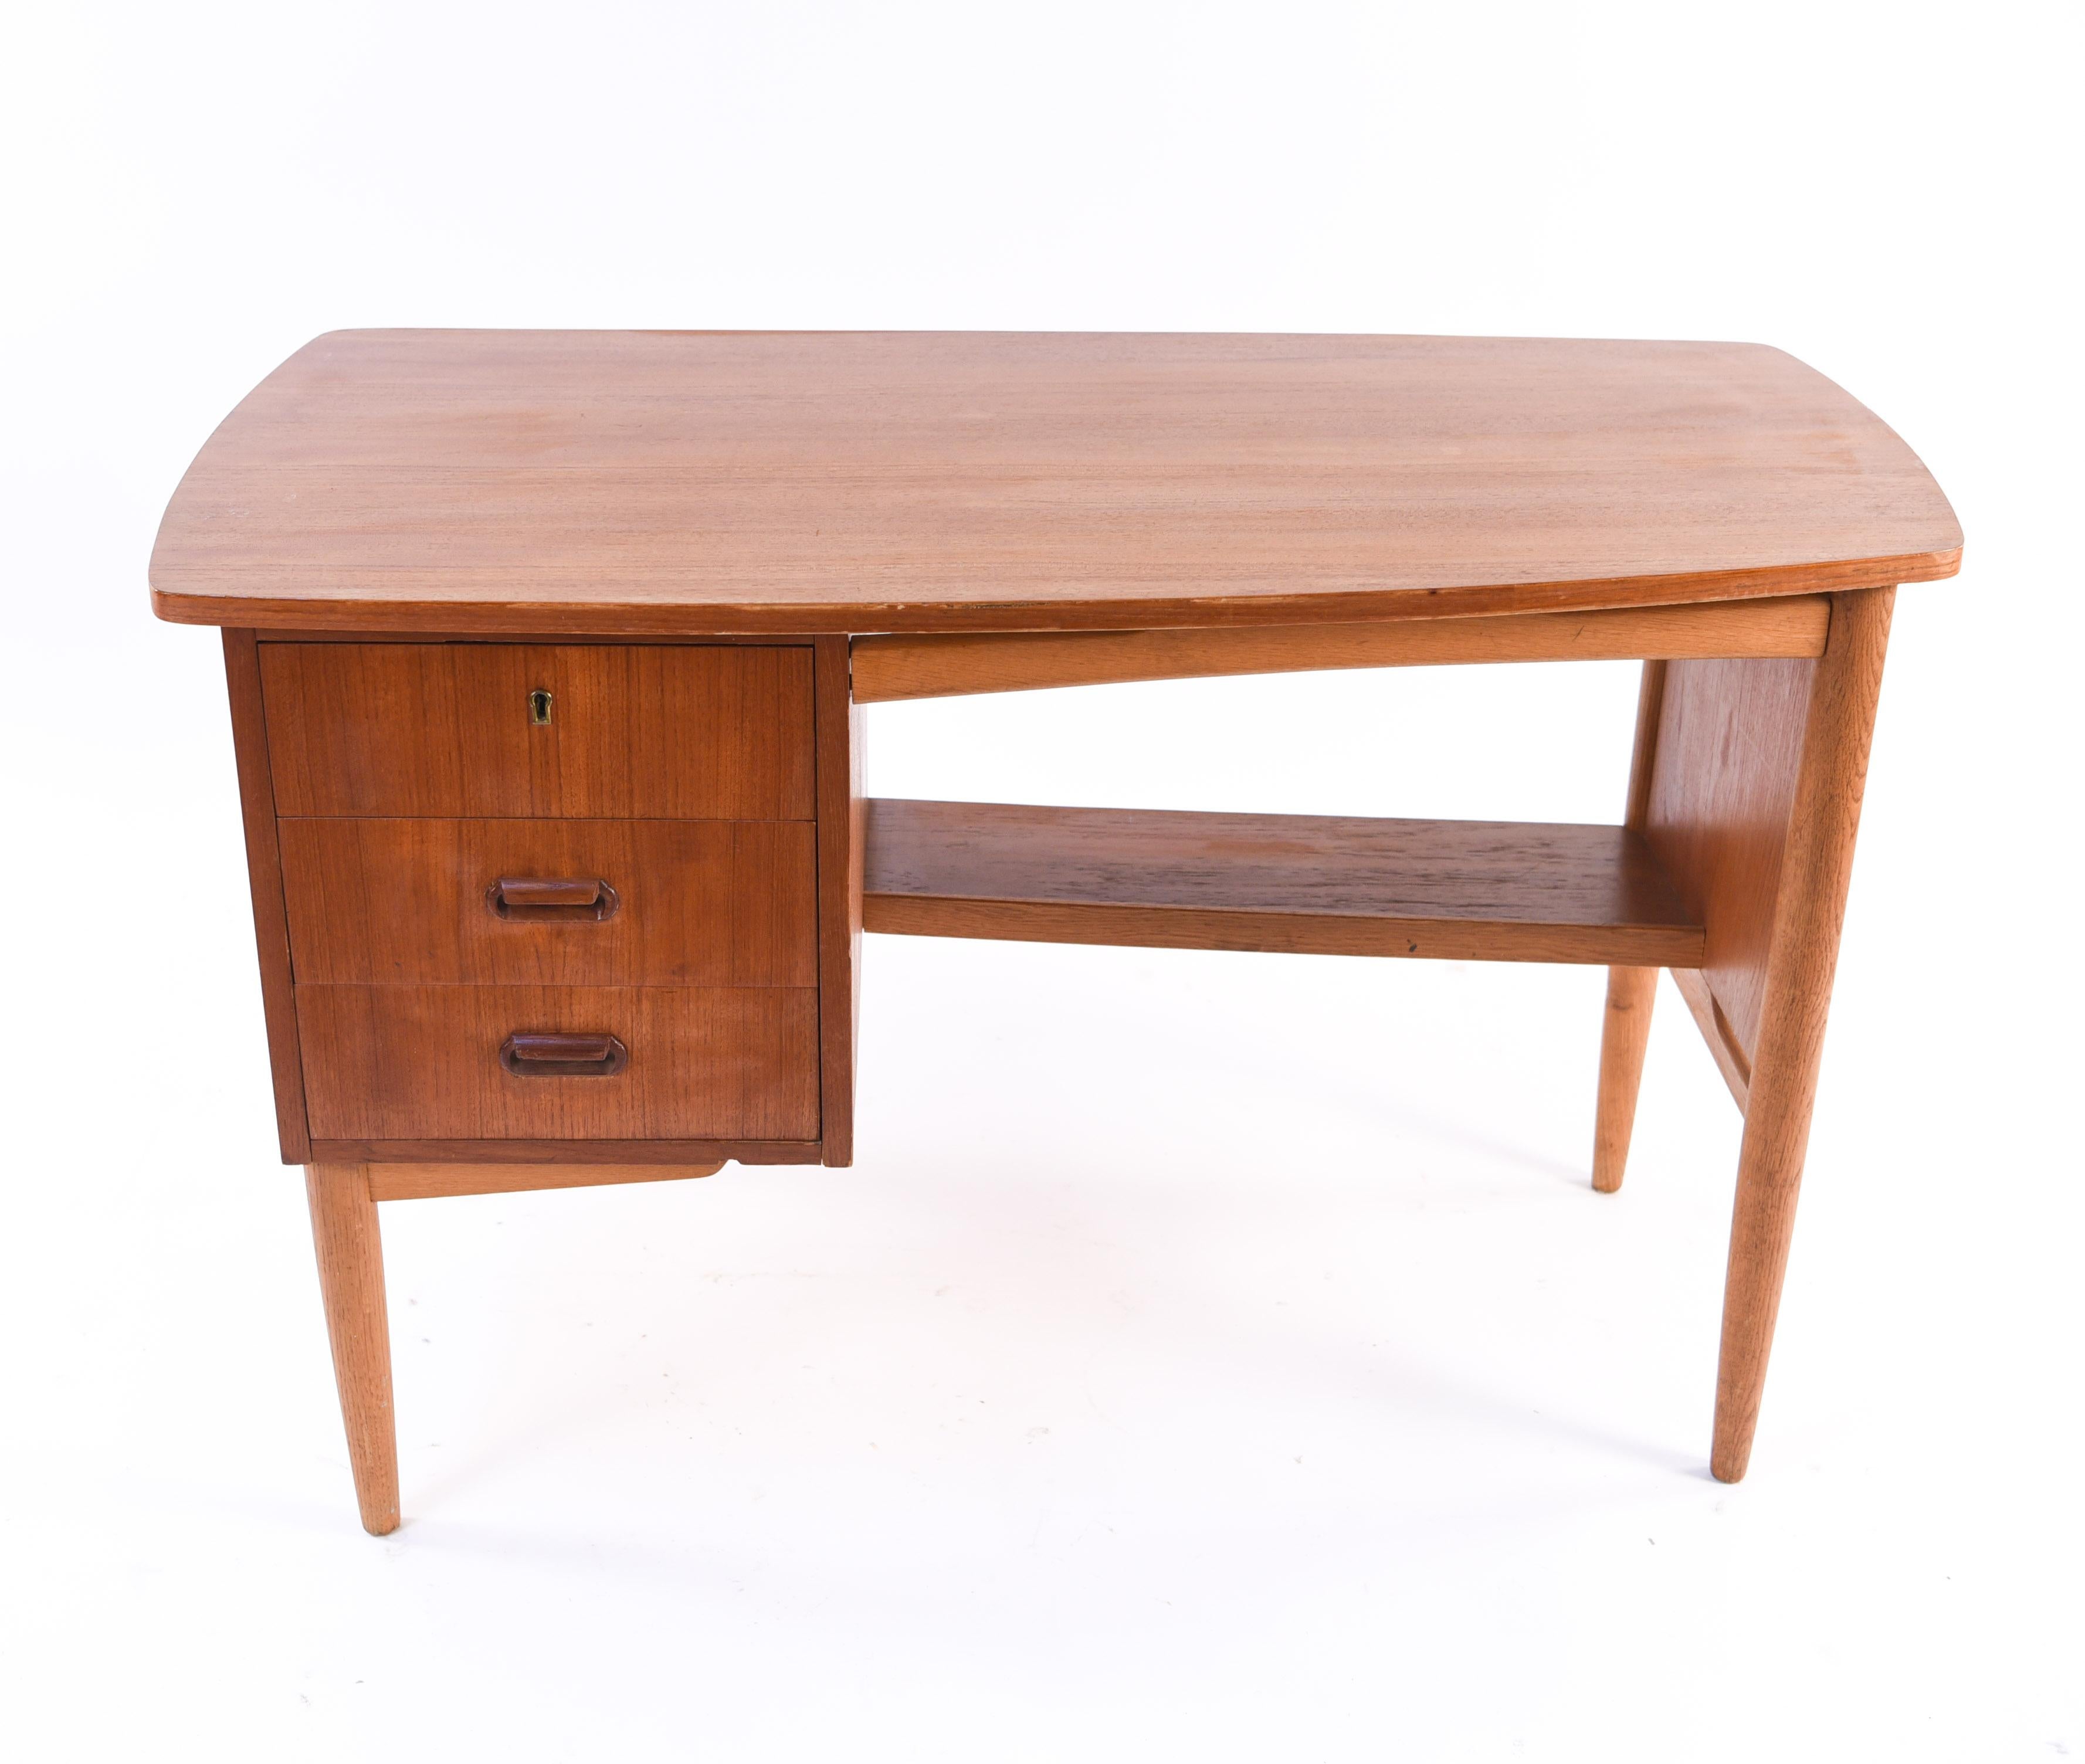 Work in style with this Danish midcentury teak desk. The juxtaposition of curved and straight edges gives this piece a unique, modern feel. Its petite size would be ideal for apartment living or smaller office space.